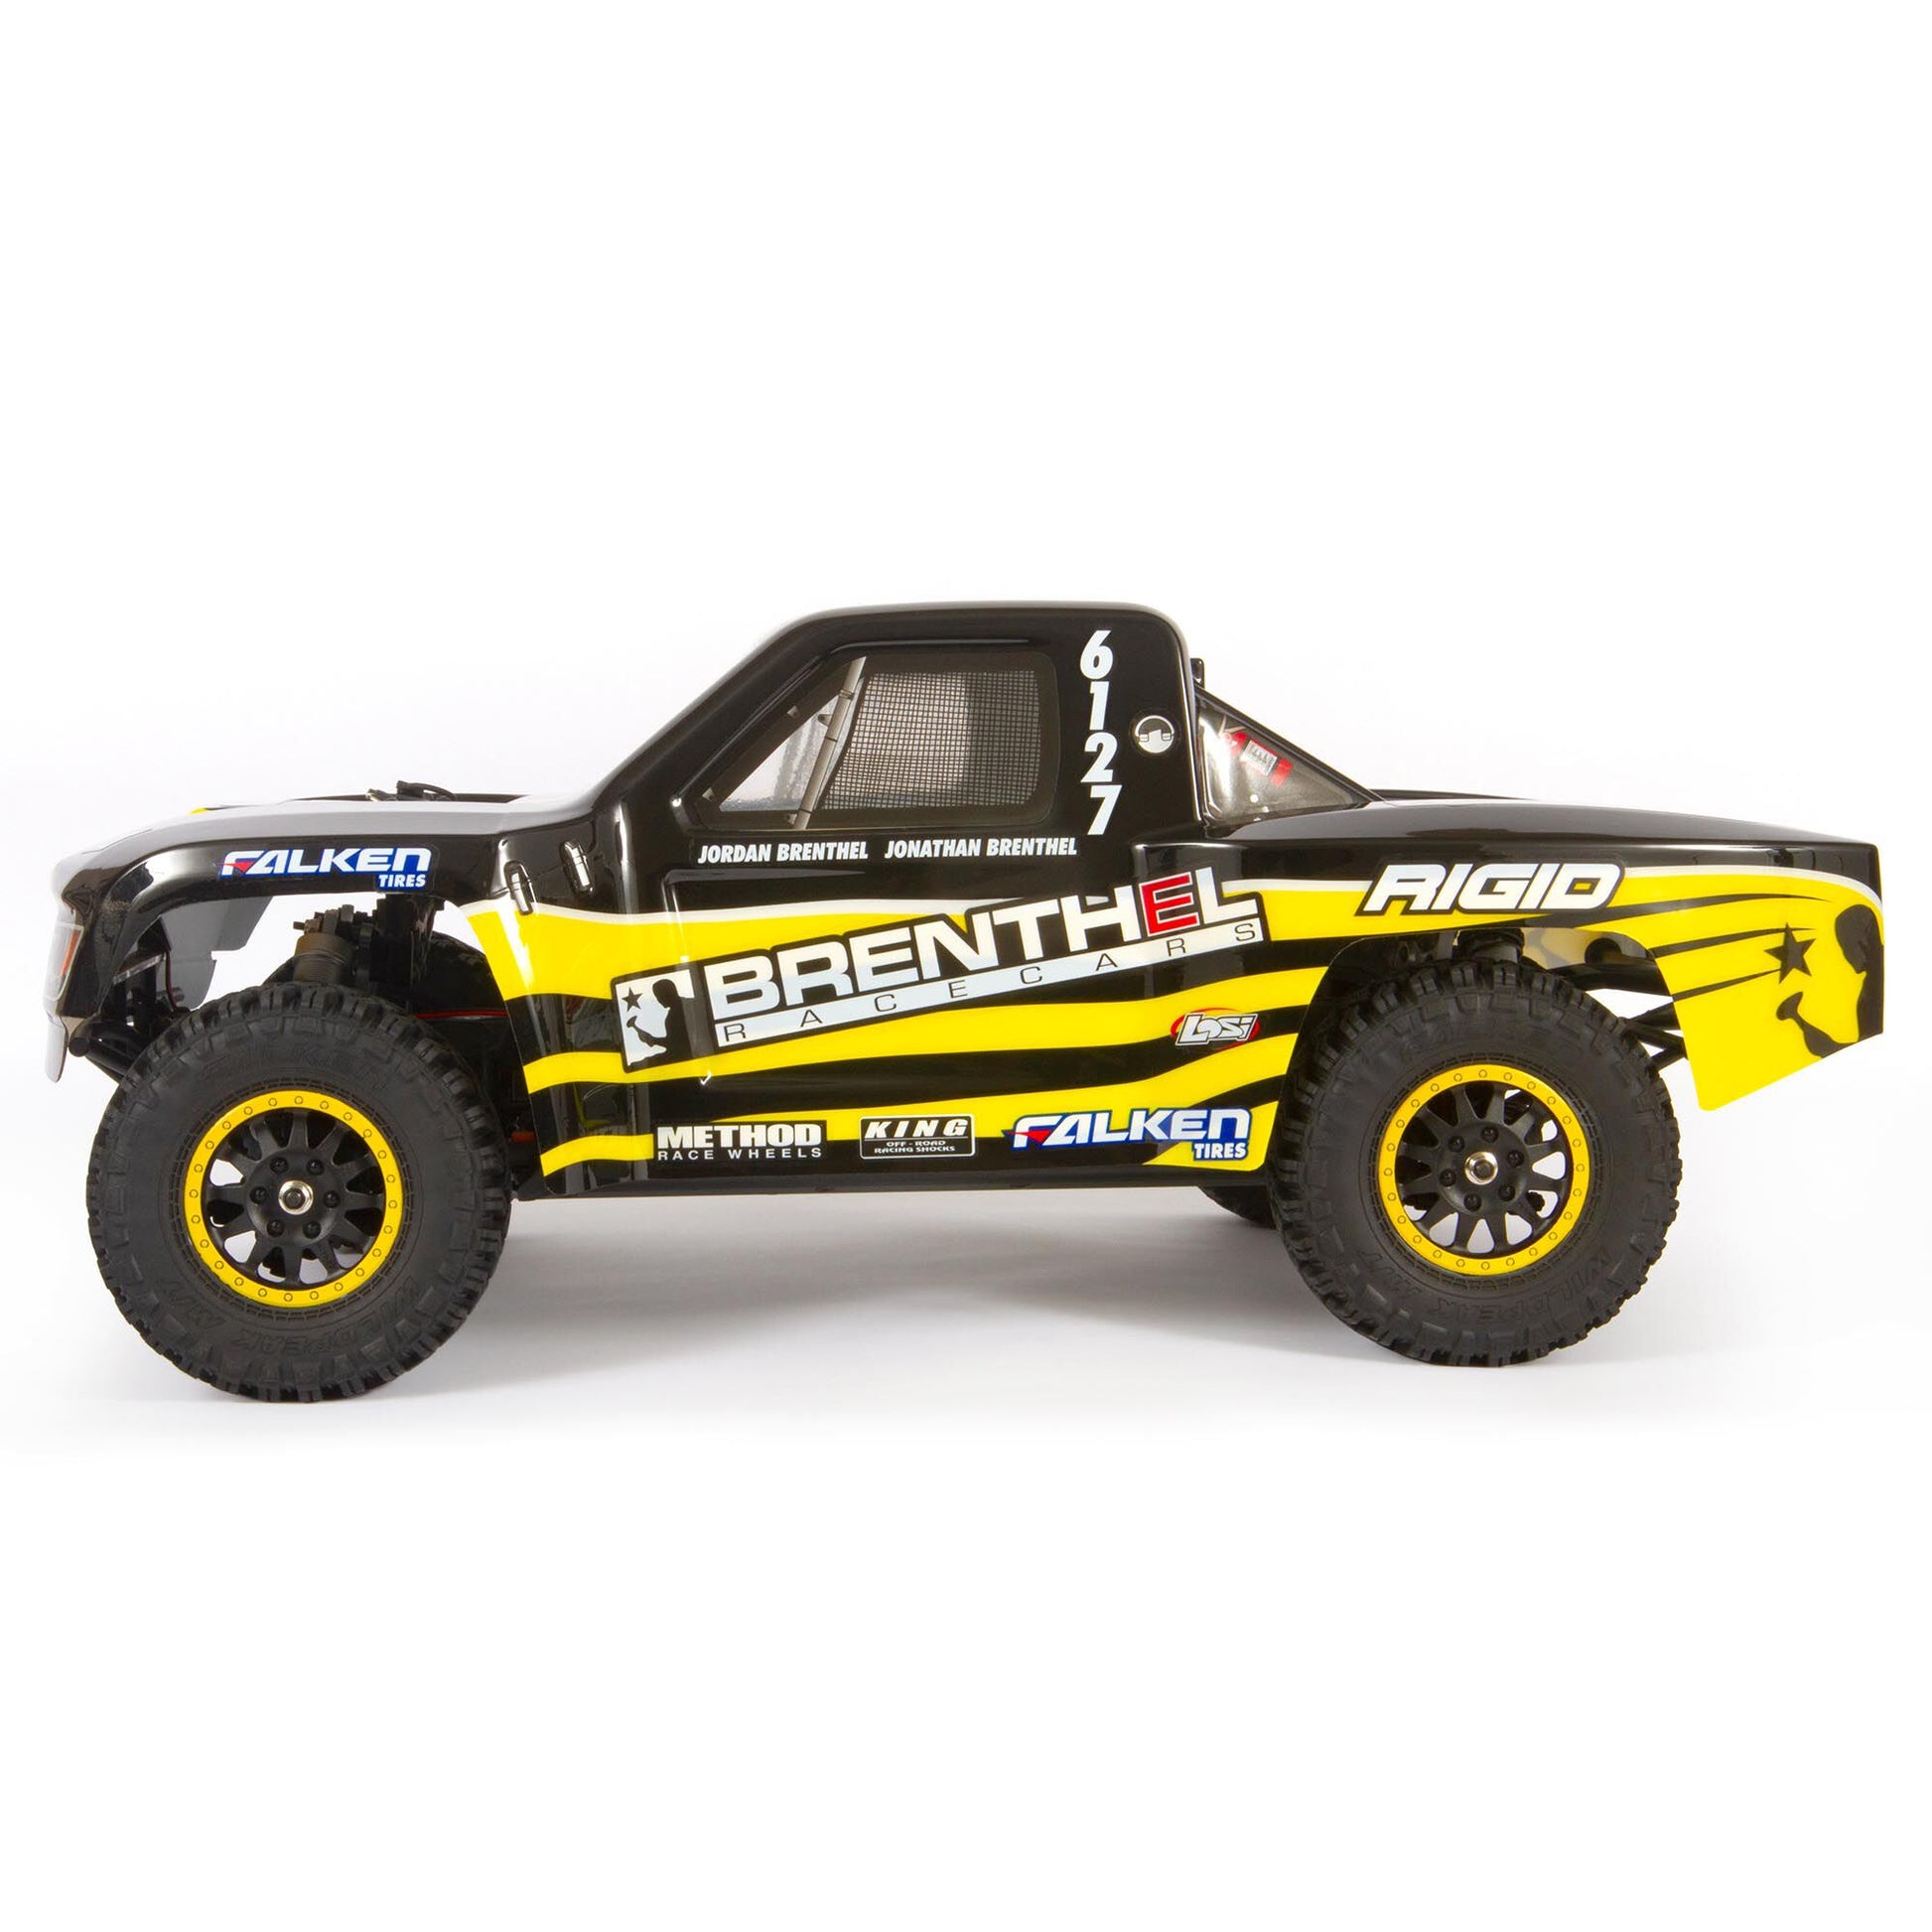 Losi 1/10 TENACITY TT Pro 4WD SCT Brushless RTR with Smart, Brenthel LOS03019T1